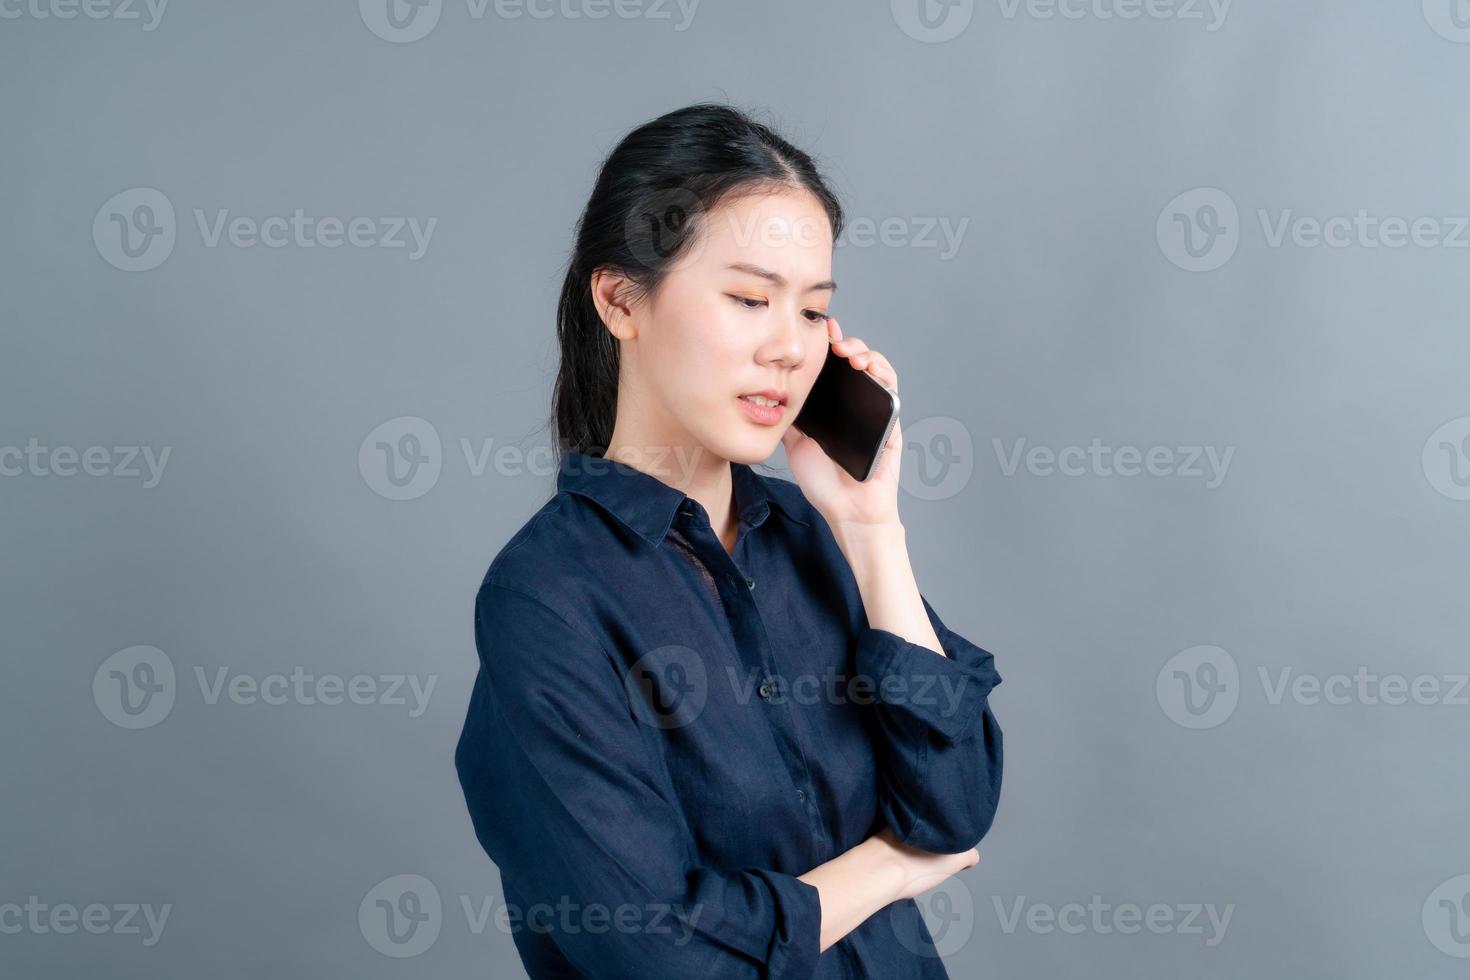 Asian woman using mobile phone talking business photo